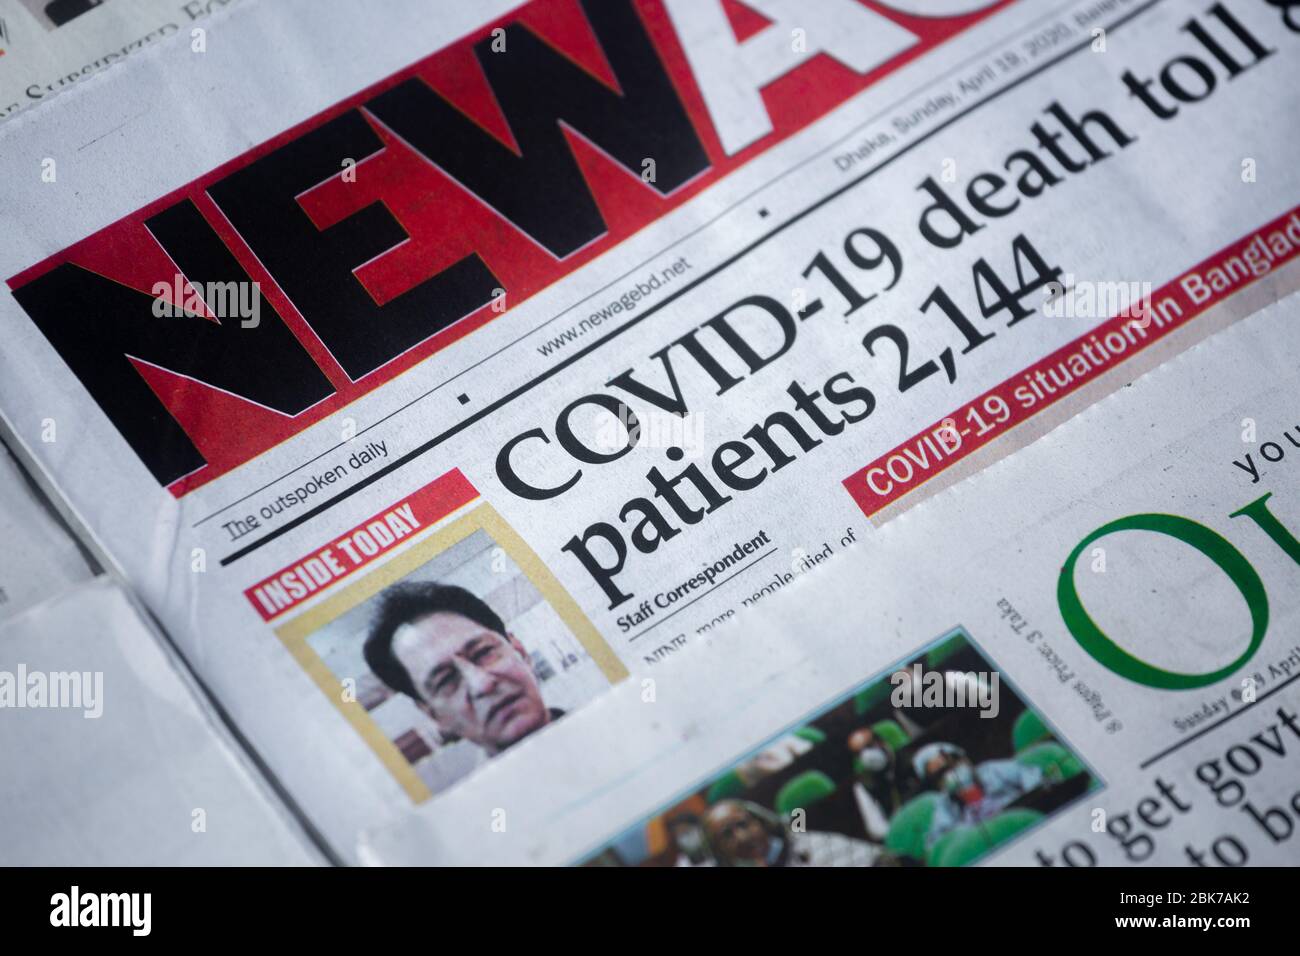 Today's headline of a popular English newspaper in Bangladesh is "COVID-19  death toll 84, Patients 2144 Stock Photo - Alamy